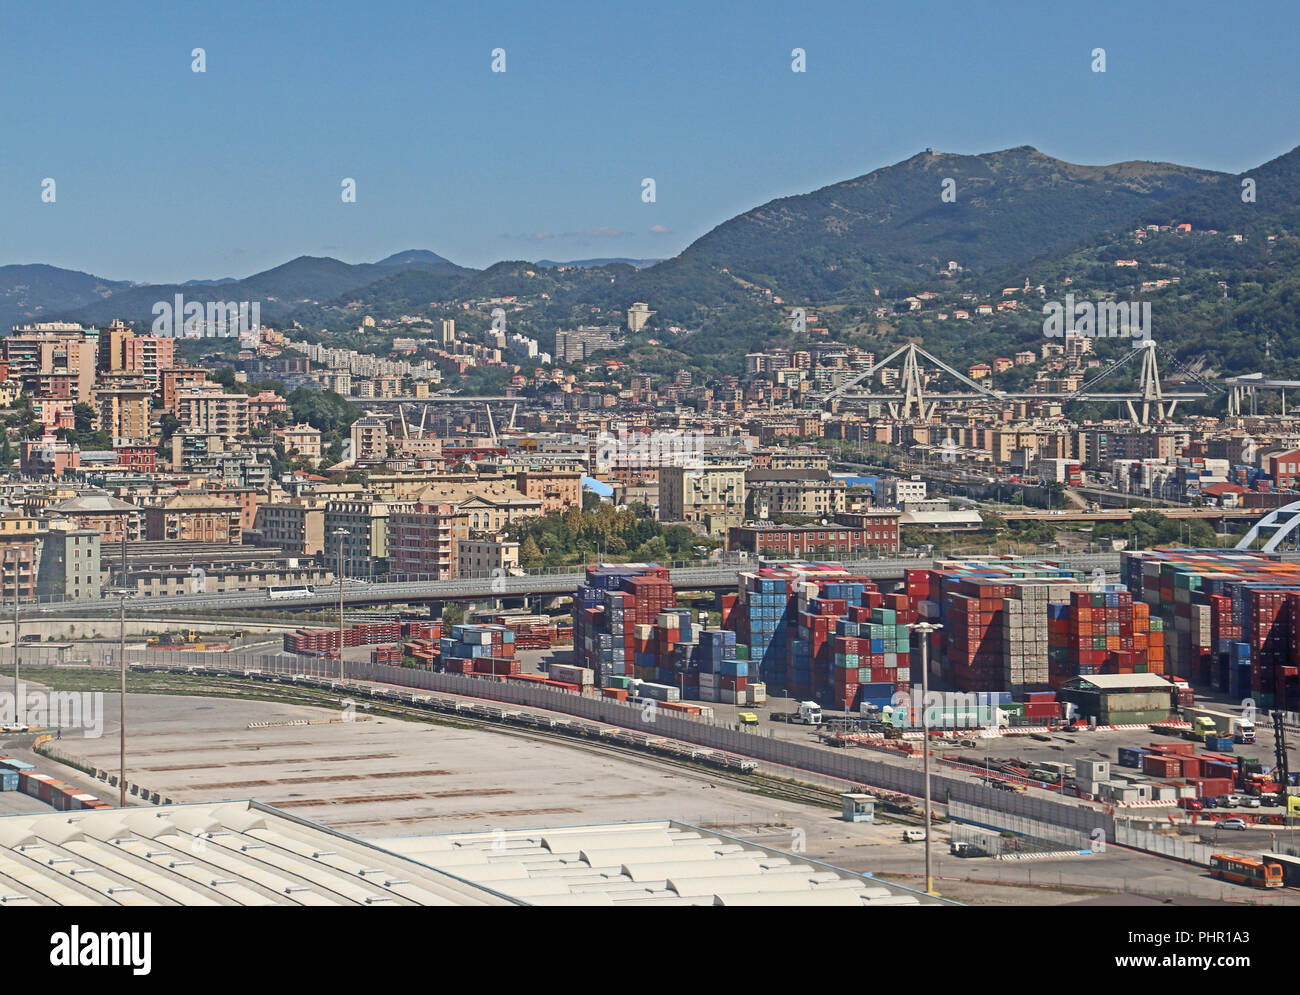 GENOA,ITALY - AUGUST 27, 2018: Aerial view of the Morandi bridge which collapsed over the houses of via Fillak and via Porro on August 14, 2018 The re Stock Photo